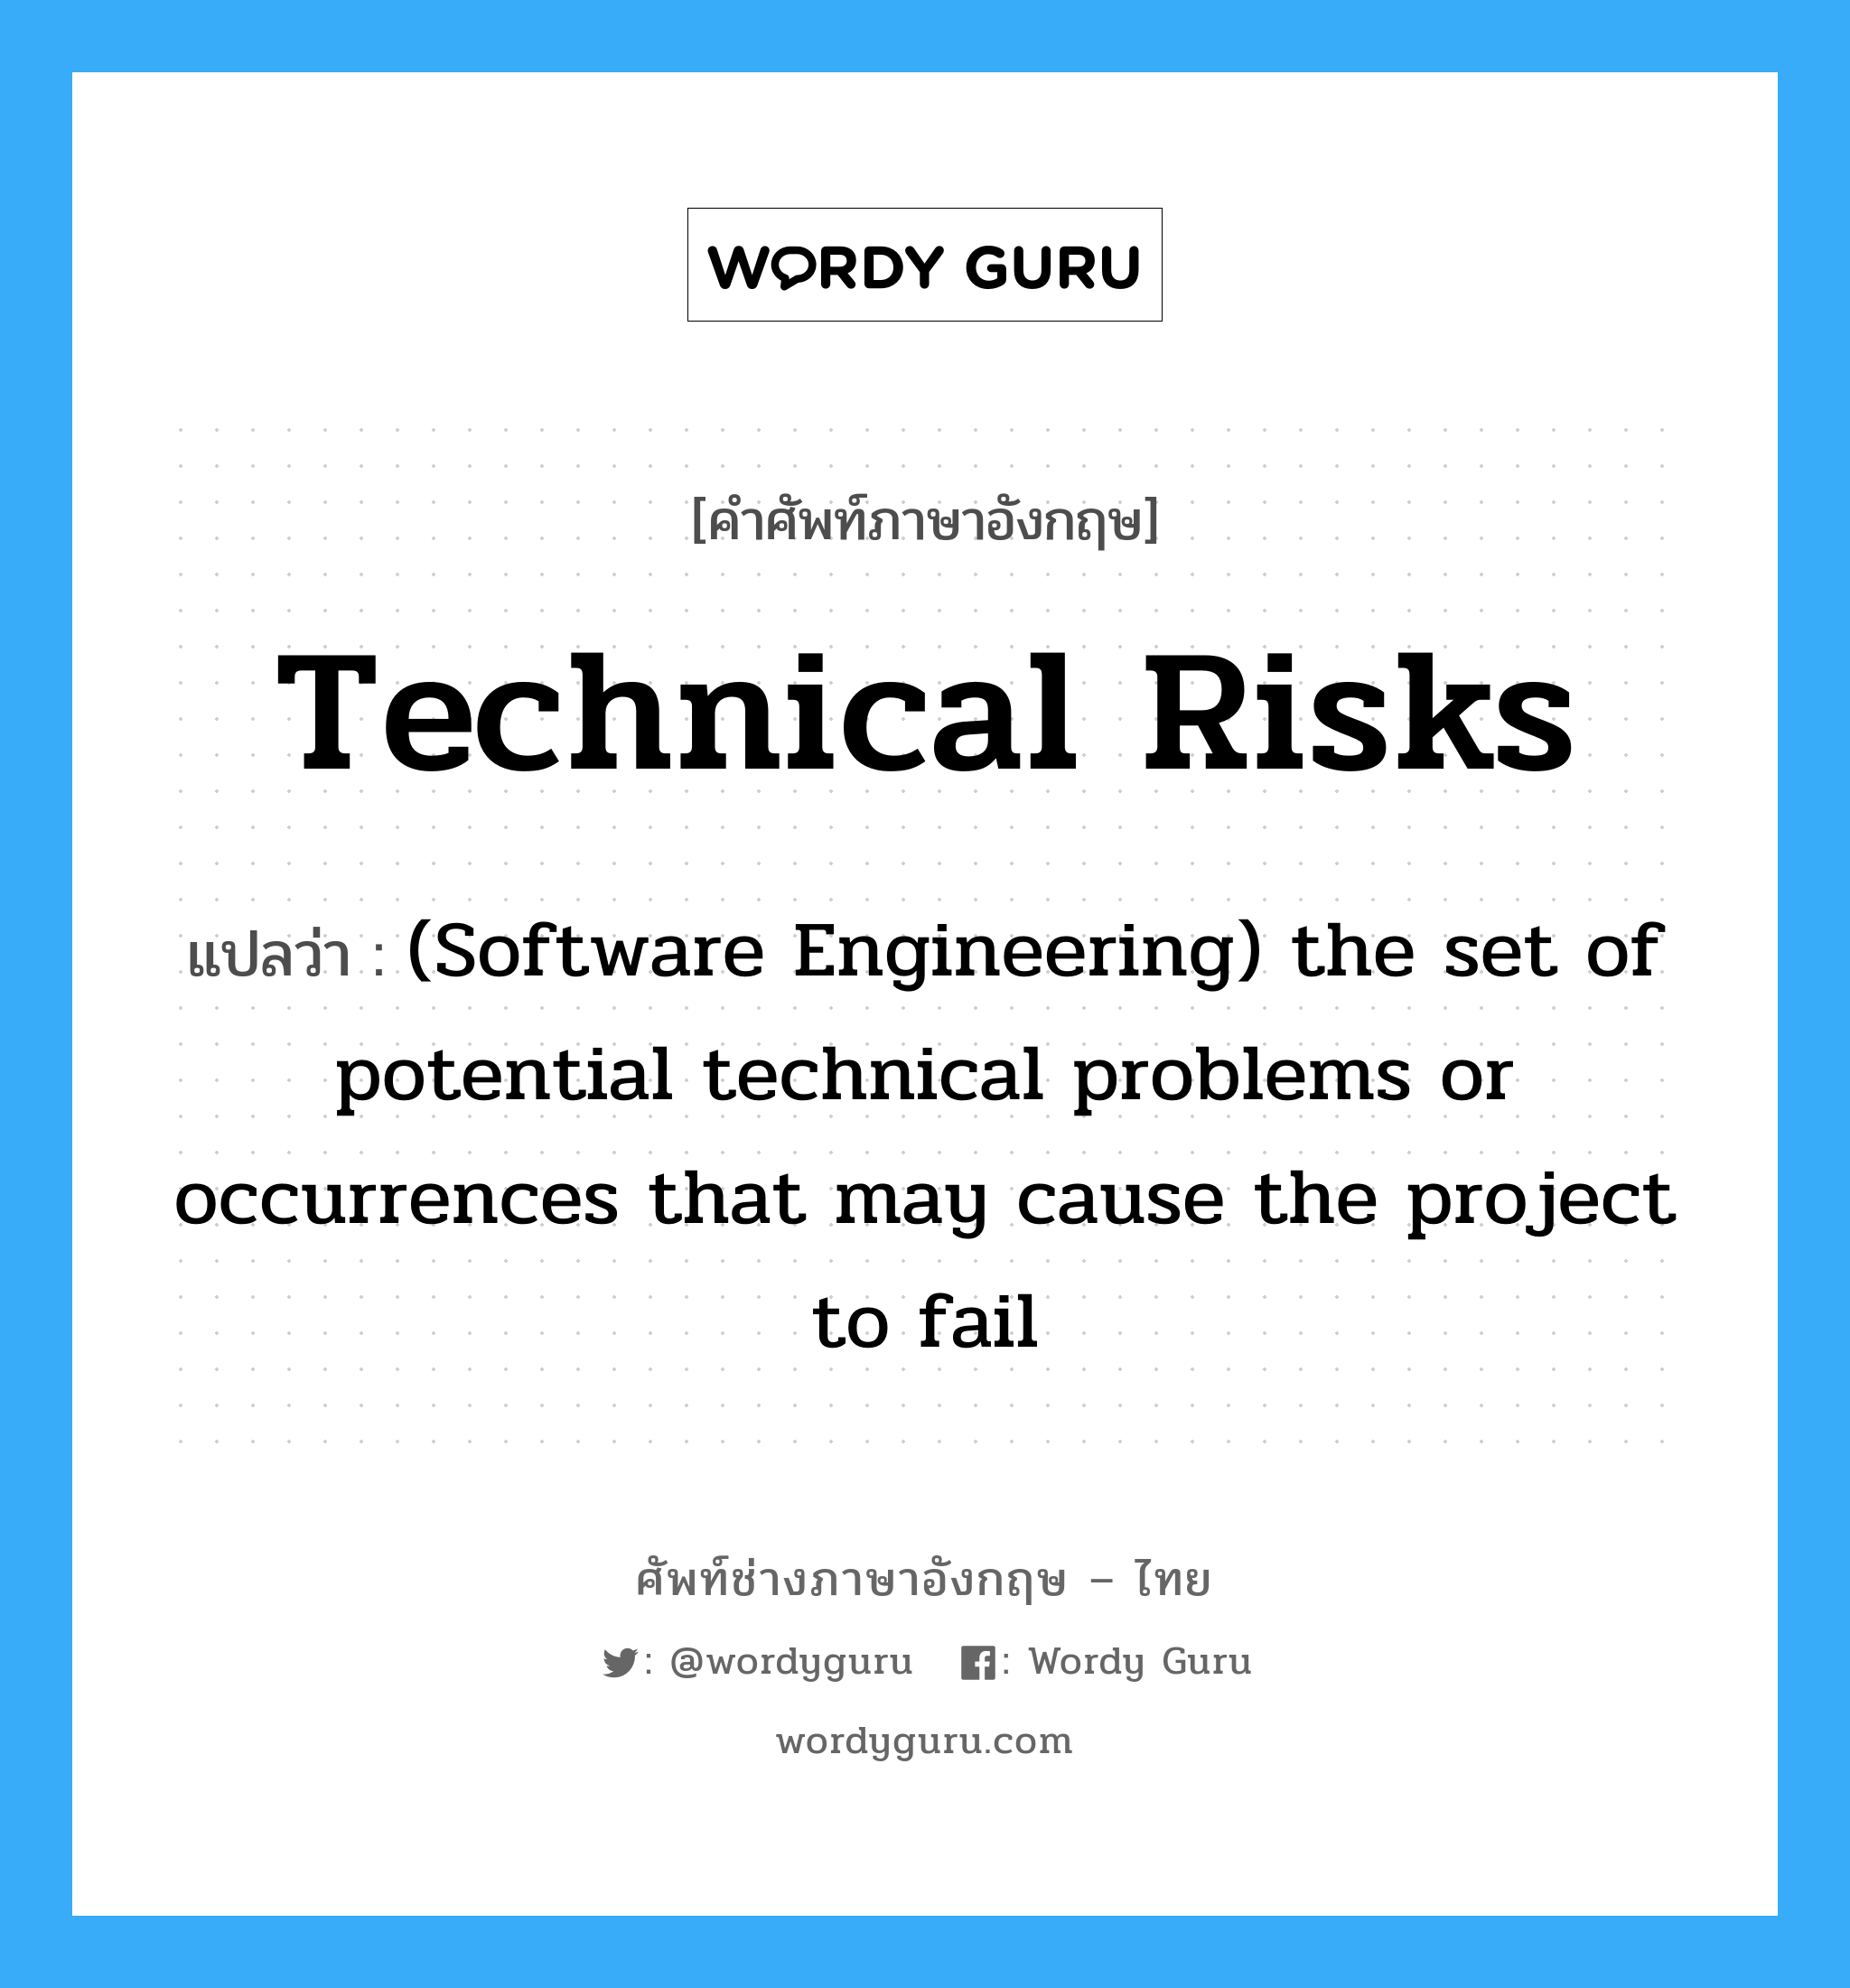 Technical risks แปลว่า?, คำศัพท์ช่างภาษาอังกฤษ - ไทย Technical risks คำศัพท์ภาษาอังกฤษ Technical risks แปลว่า (Software Engineering) the set of potential technical problems or occurrences that may cause the project to fail